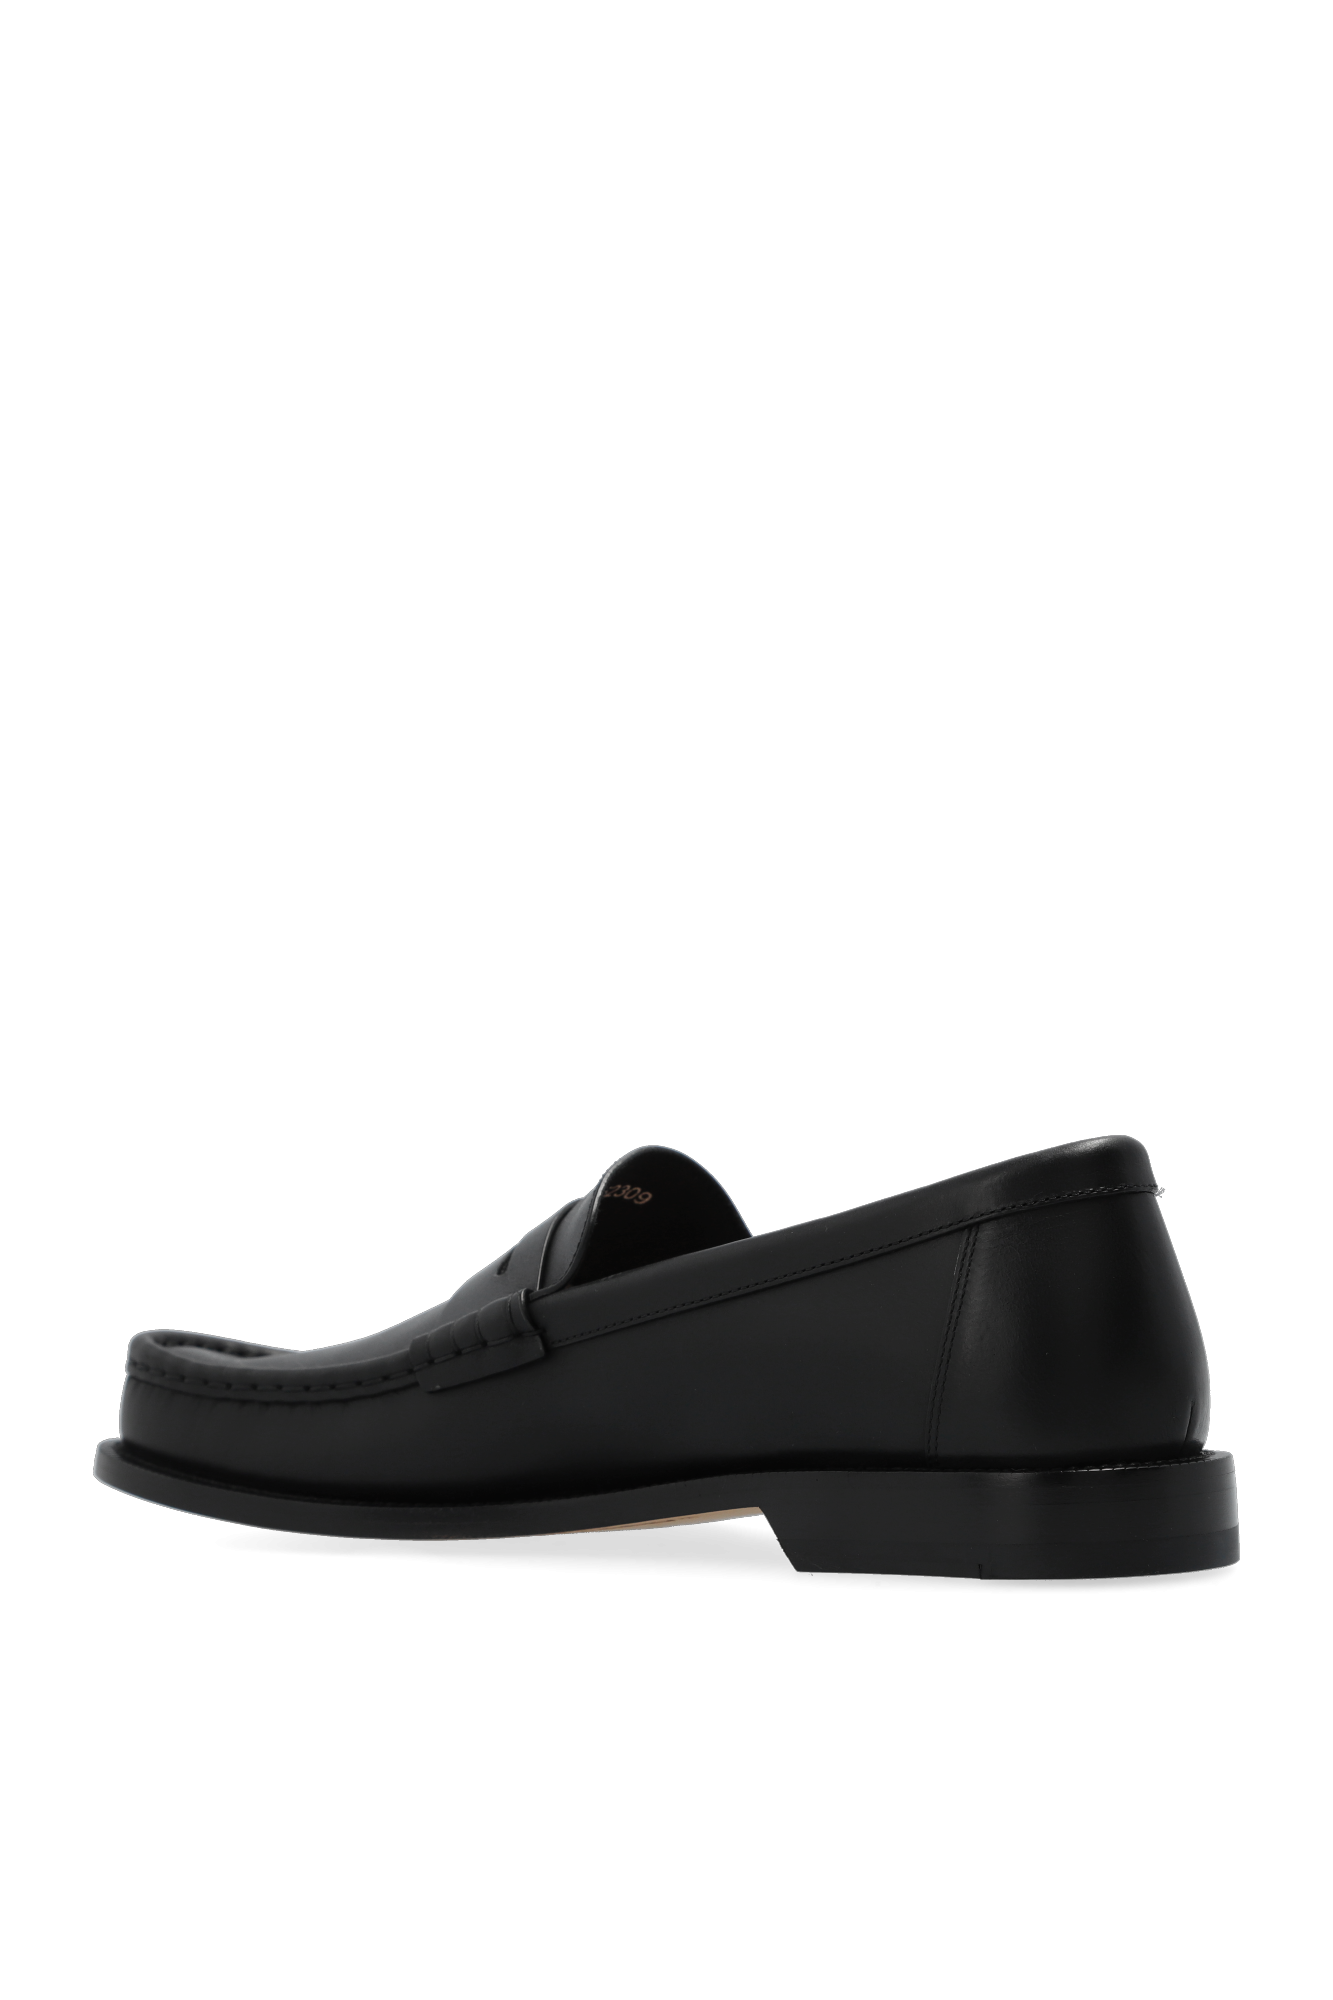 Loewe ‘Campo’ leather loafers